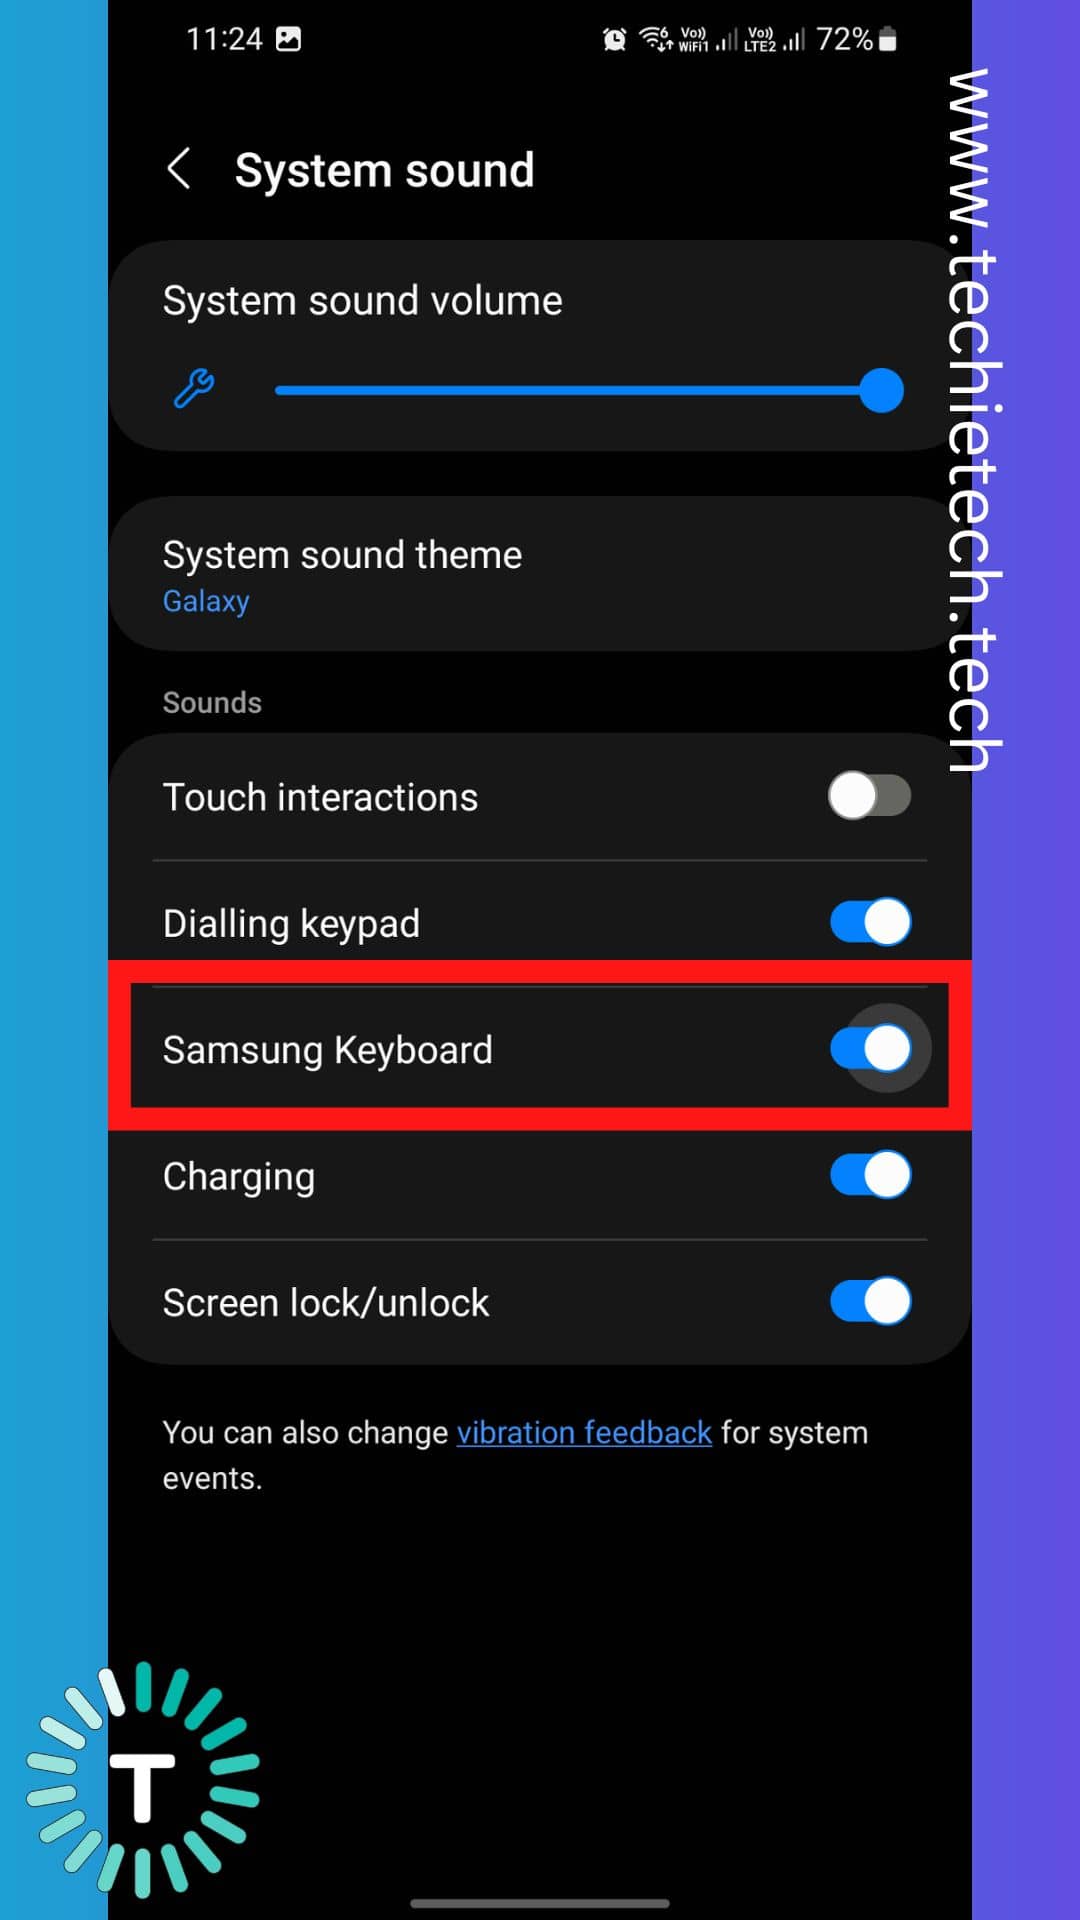 On the next screen, simply toggle OFF the option that says Samsung Keyboard, and you’re done